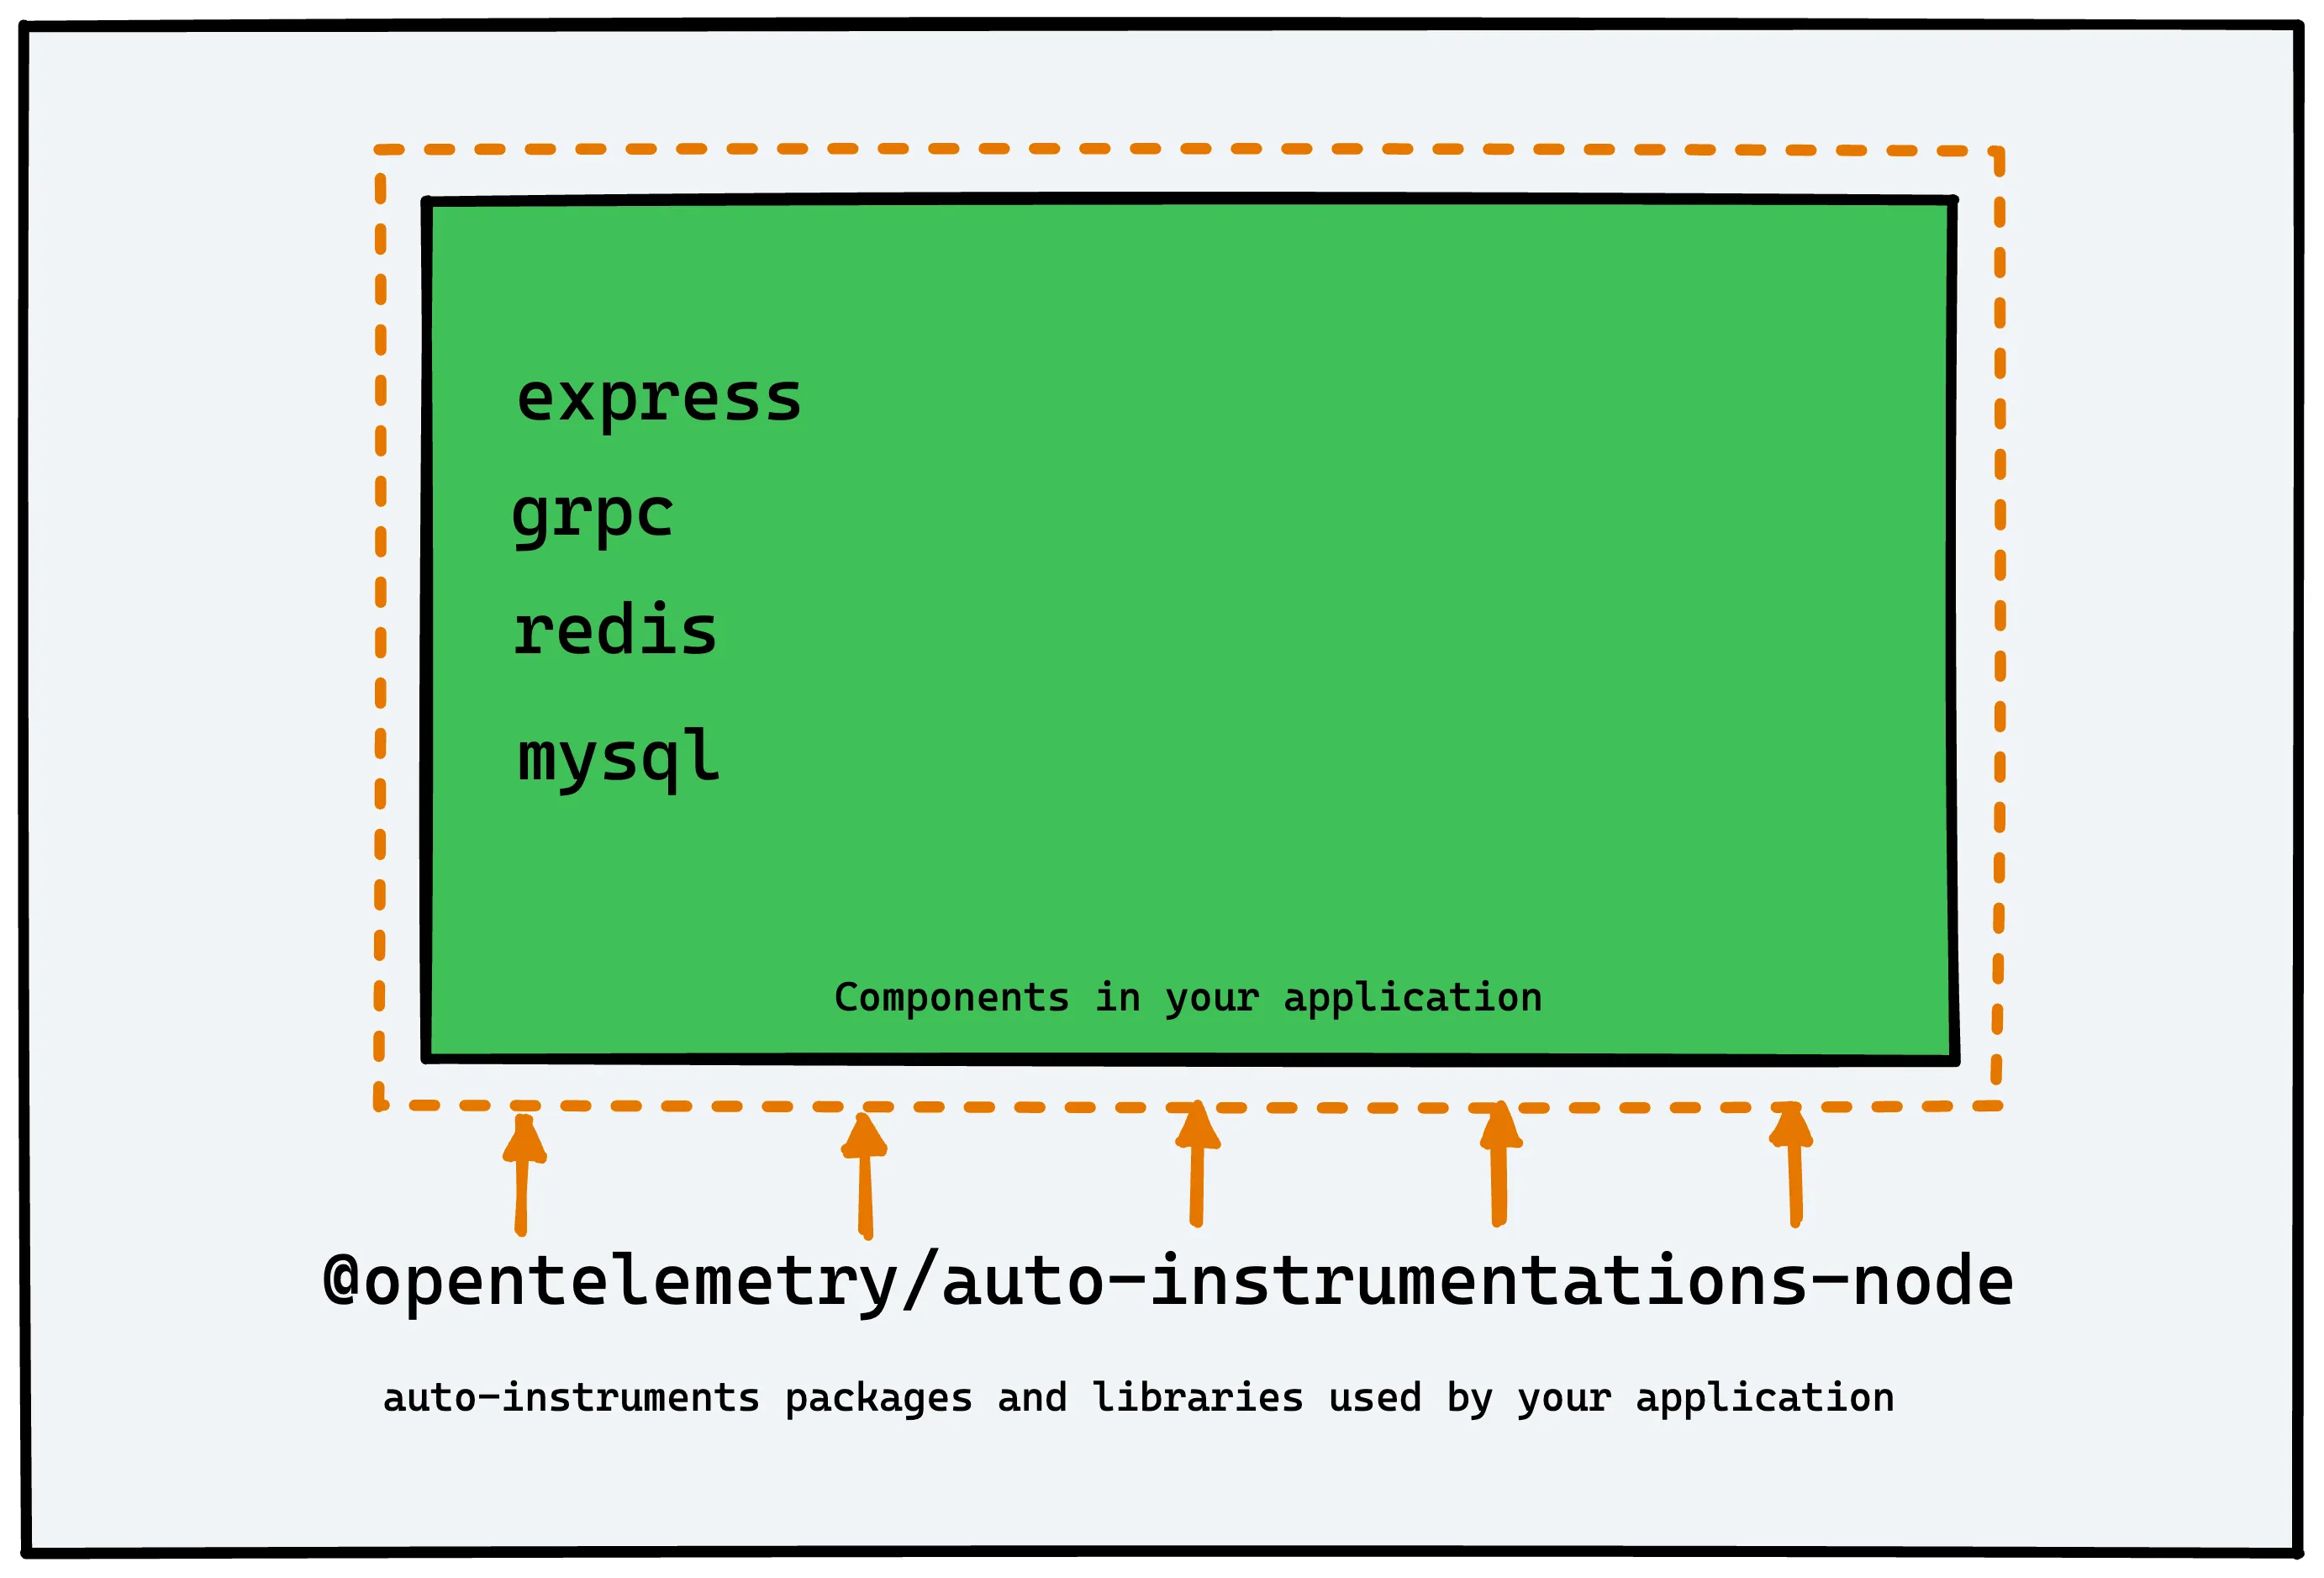 All in one auto instrumentation library - identifies and instruments packages used by your NestJS application